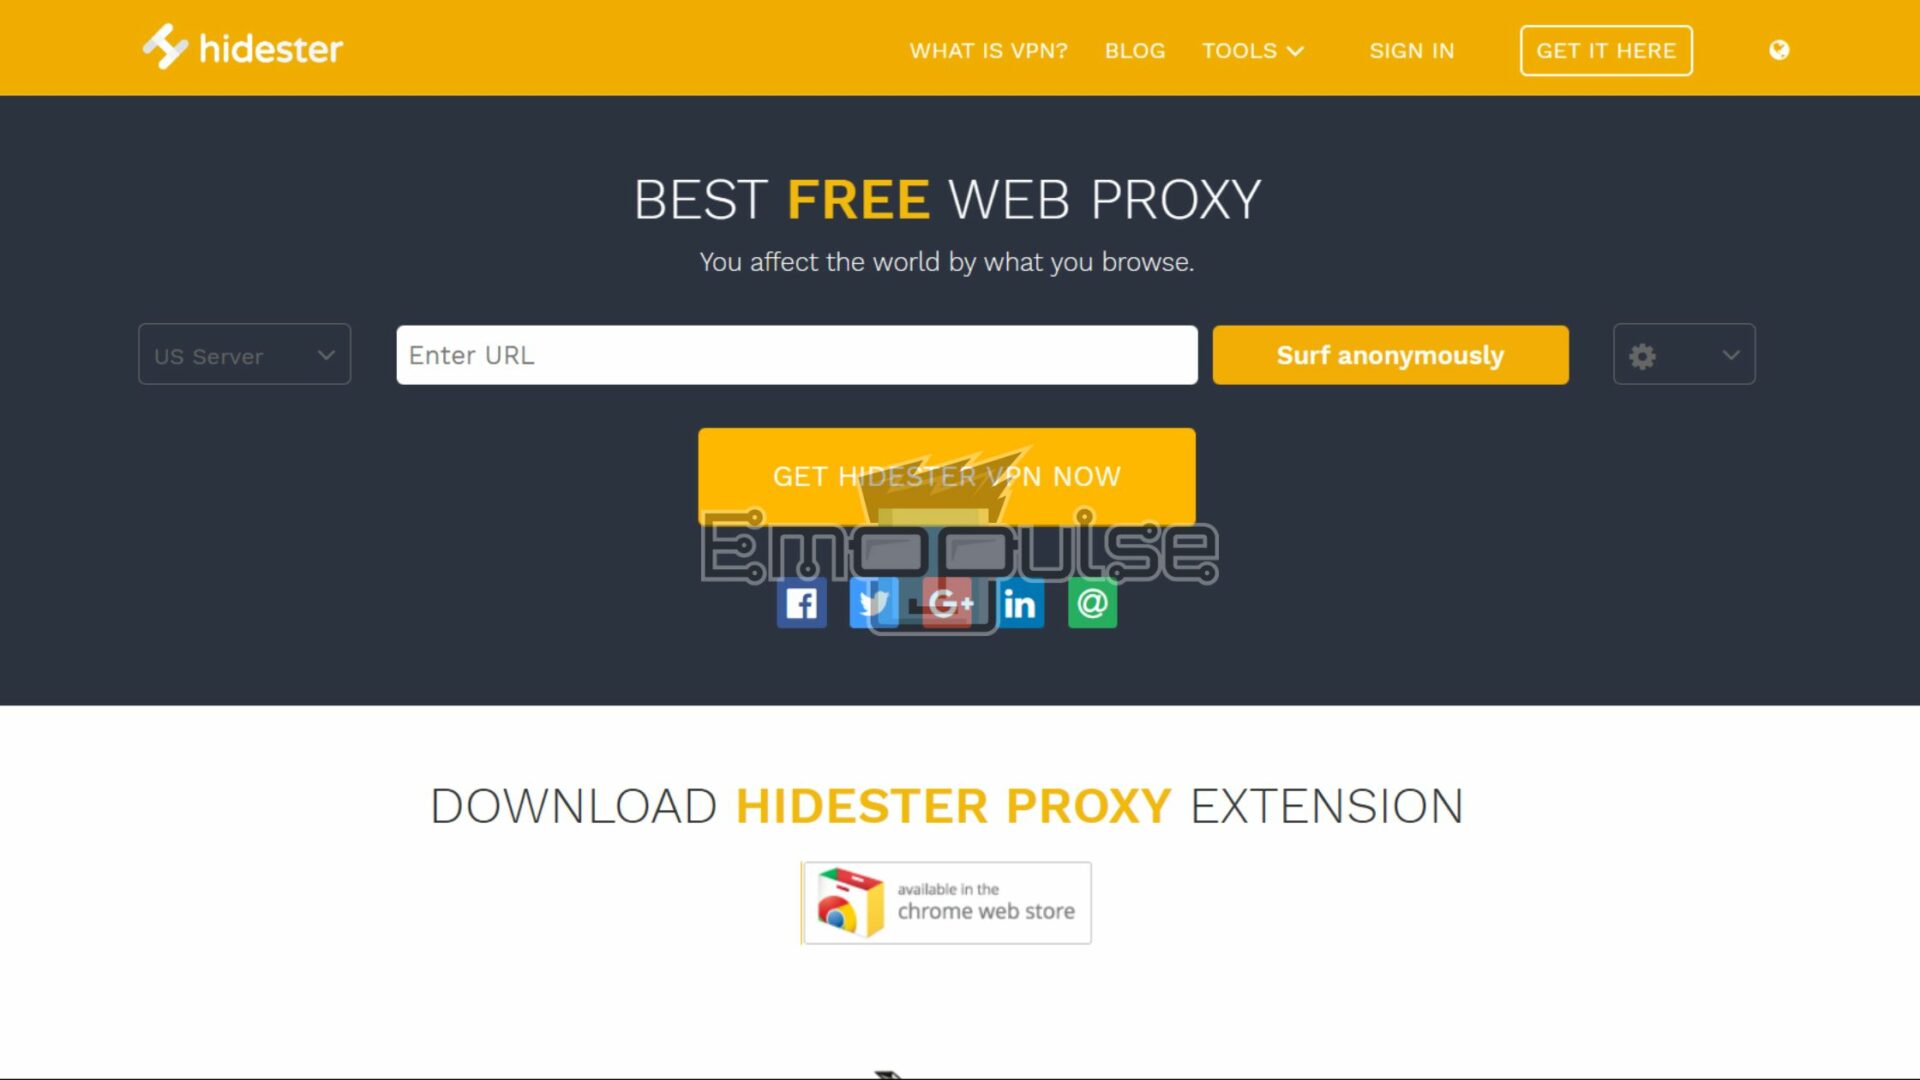 Hidester.com Offers Online Anonymous Proxy Services